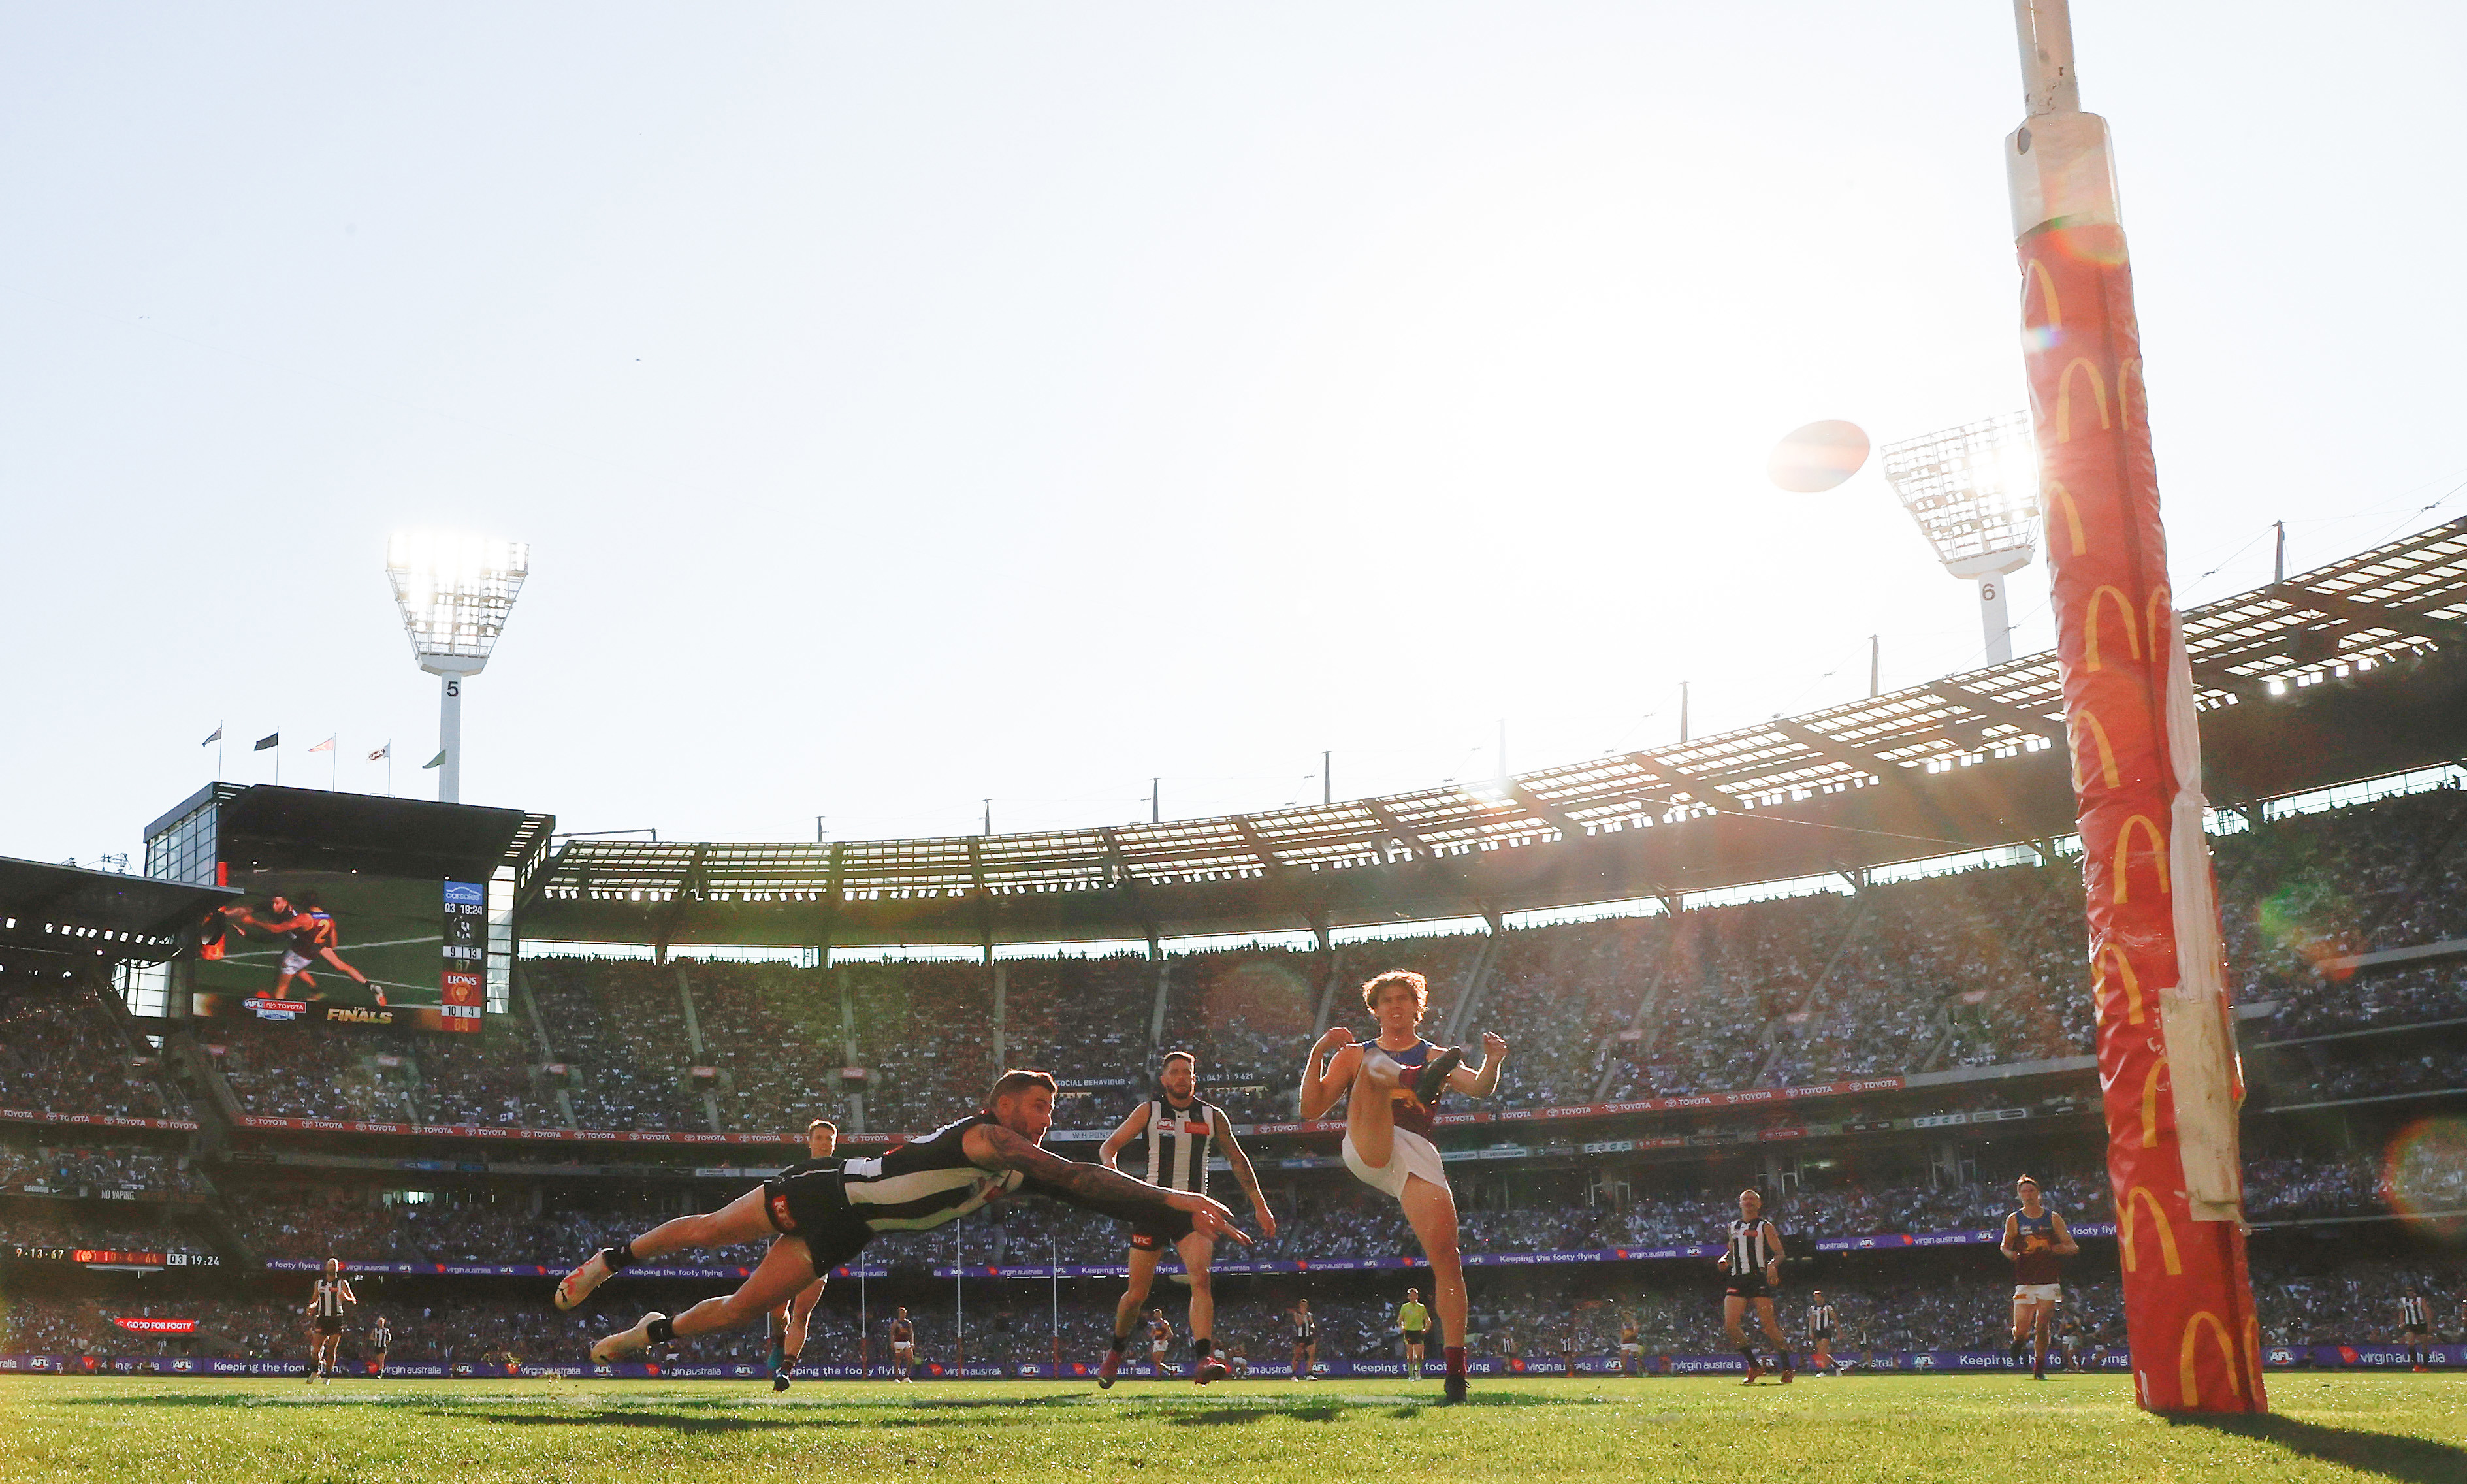 The AFL grand final will remain at the MCG until at least 2059.